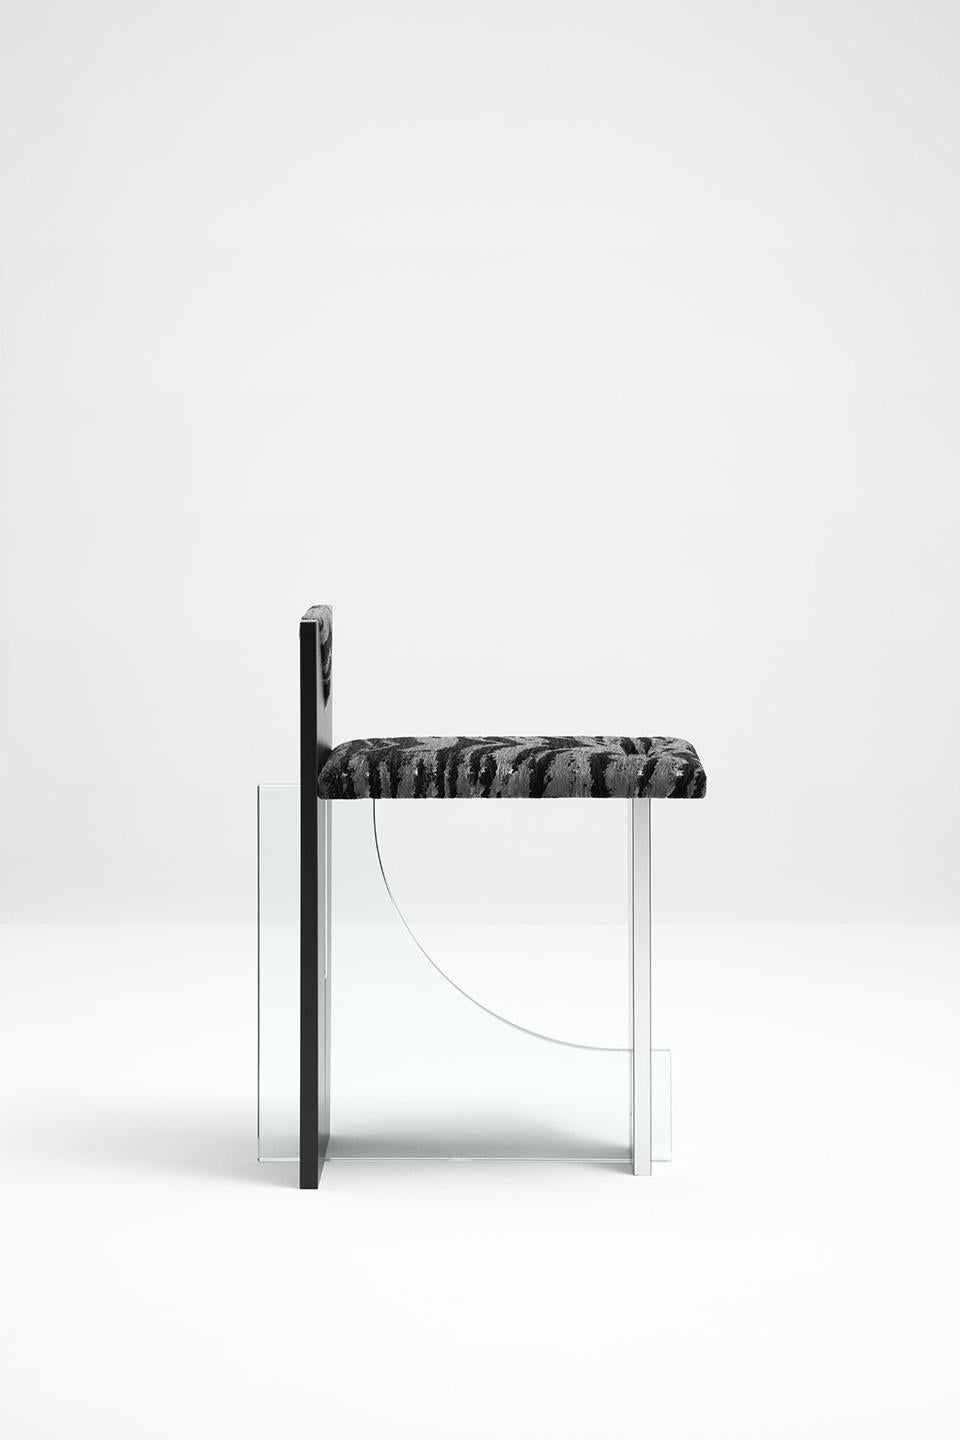 Chair with structure in glass and wood laminated in brushed steel and matte black. Upholstered in tiger silver fabric and polished steel detailing on the backrest.
Dimoremilano, by designer Dimorestudio
Code: Sedia135
22% VAT WILL BE ADDED ON